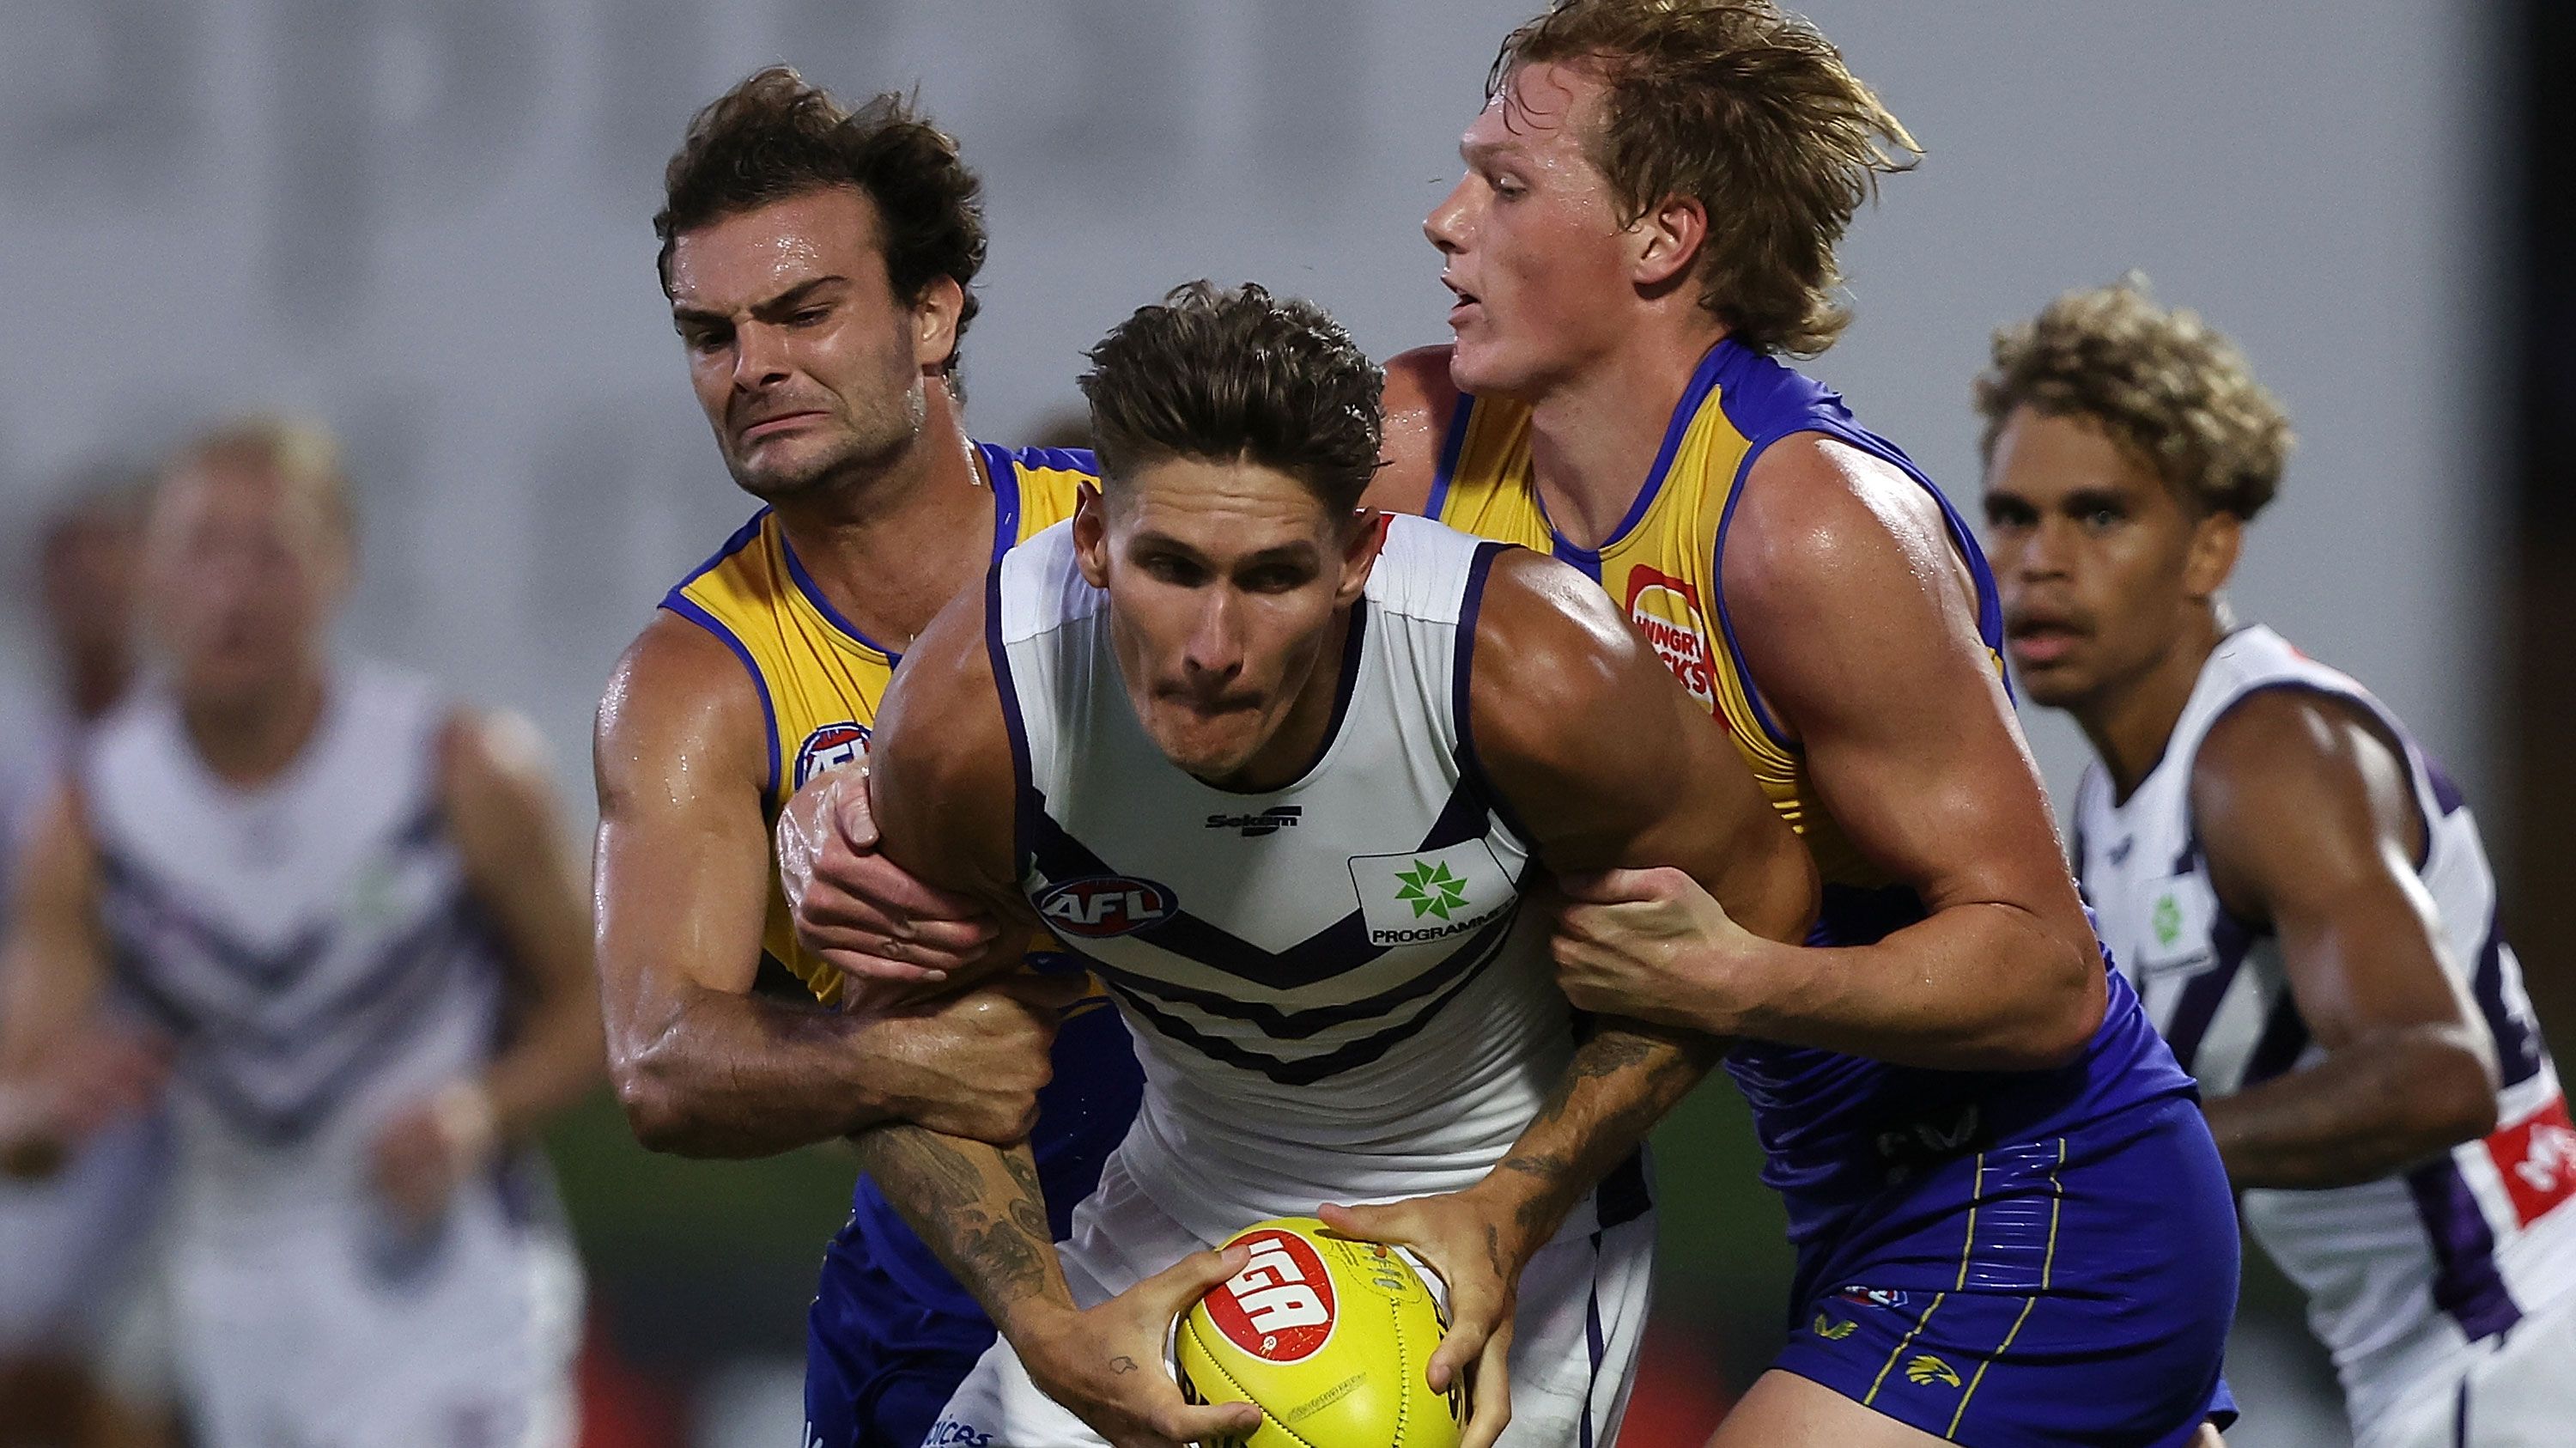 Rory Lobb of the Dockers looks to break from a tackle by Jack Petruccelle and Hugh Dixon of the Eagles during a practice match.